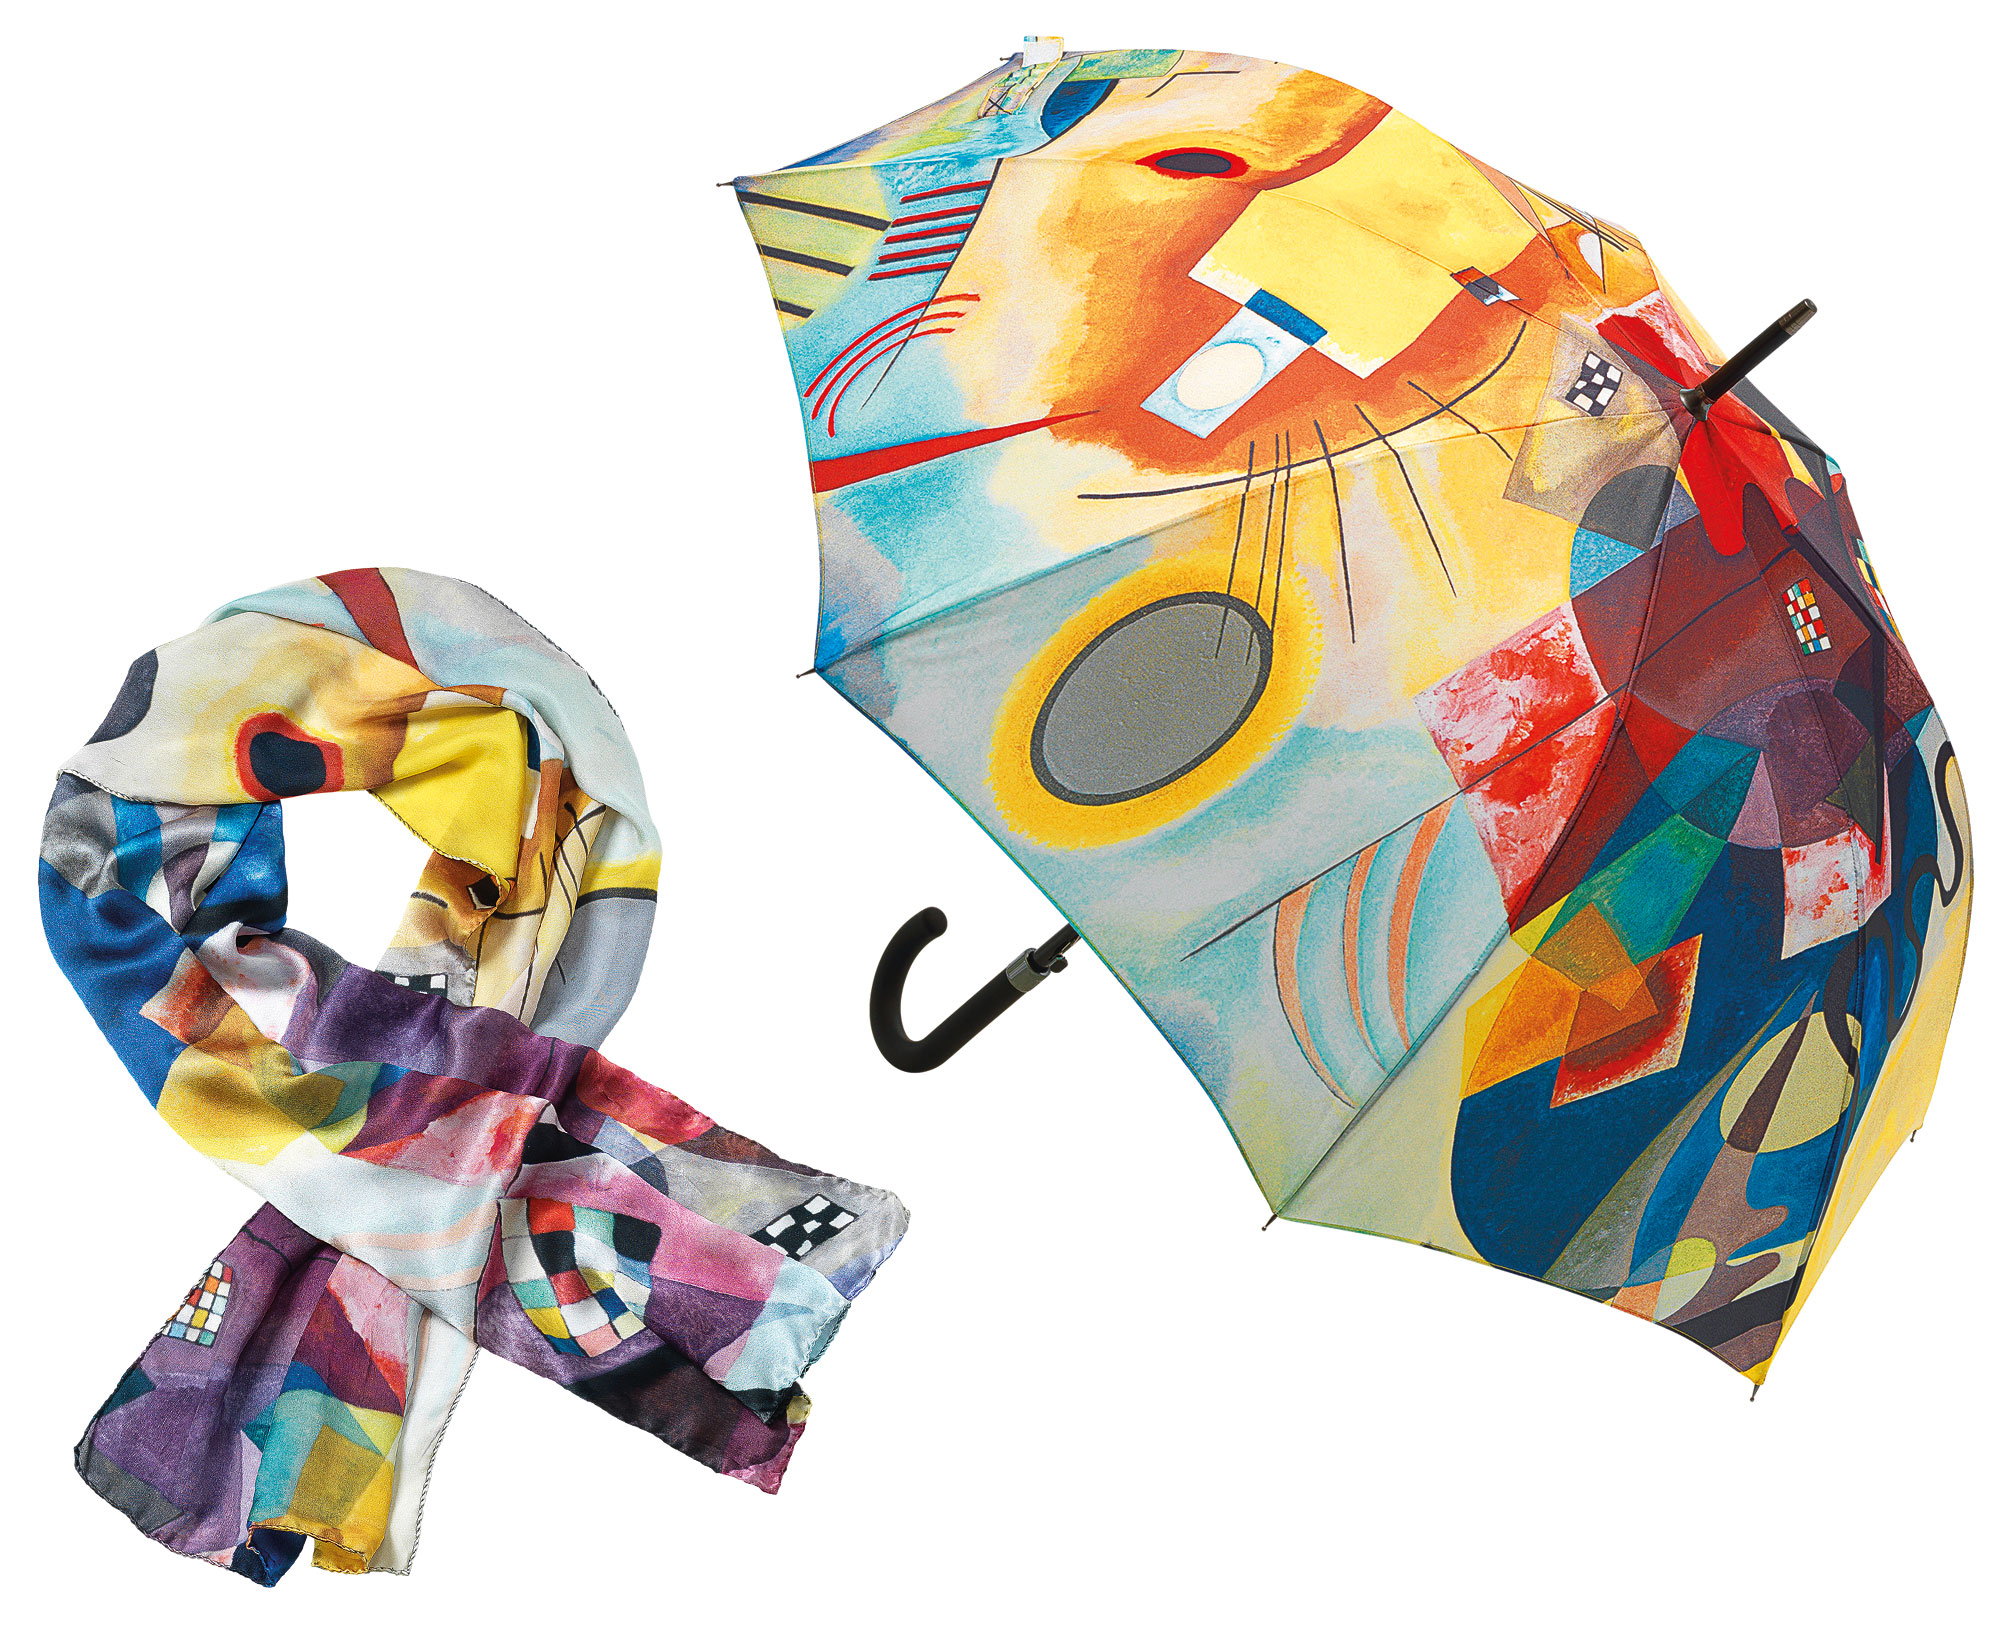 Silk scarf and stick umbrella "Yellow - Red - Blue" (1925) as a set by Wassily Kandinsky